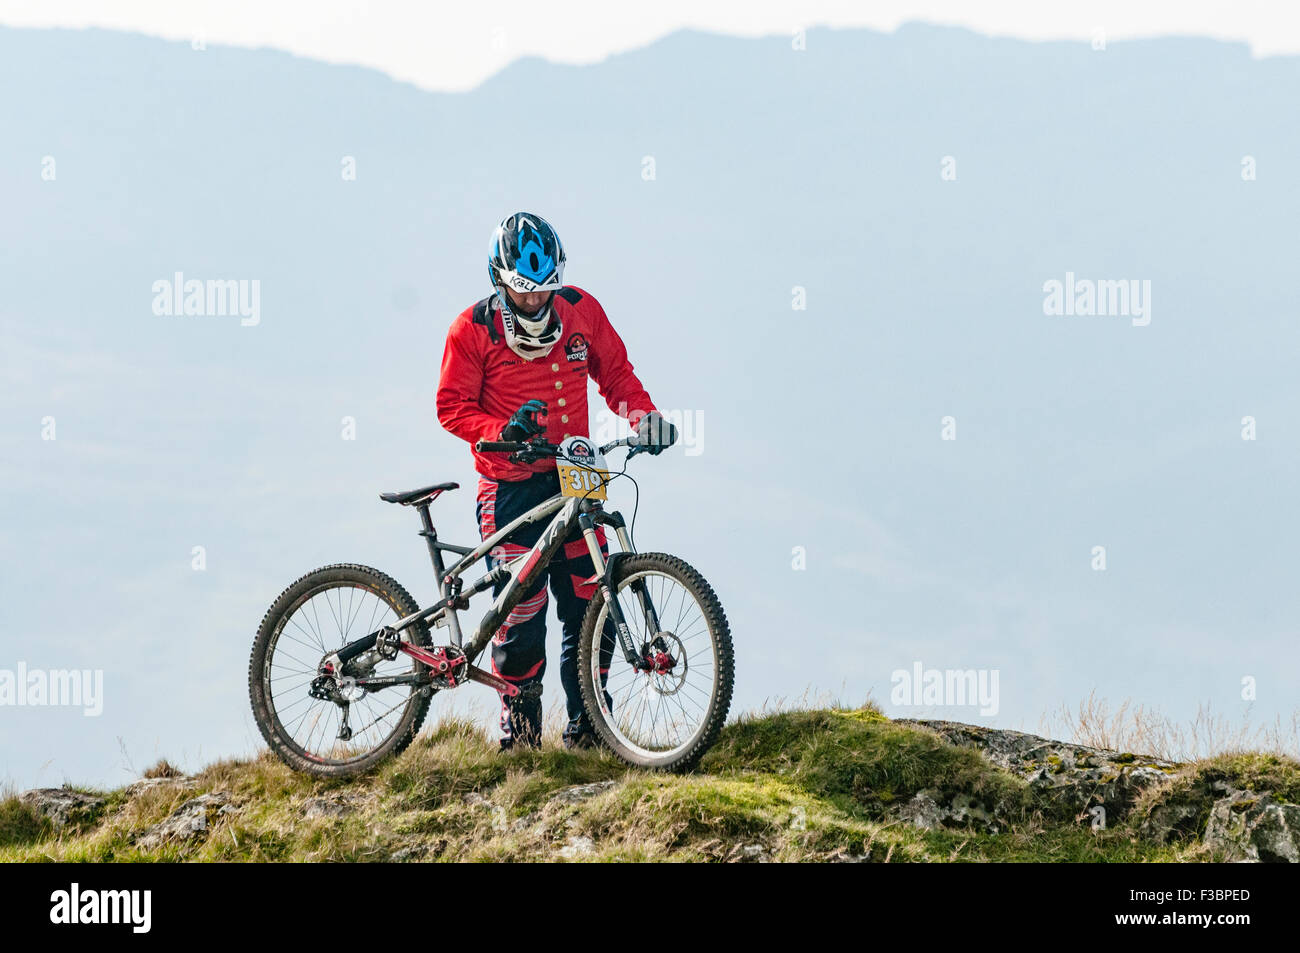 Rostrevor, Northern Ireland. 04 Oct 2015 - A competitor on the top of Slieve Martin at the start of the Red Bull Foxhunt mountain bike downhill challenge Credit:  Stephen Barnes/Alamy Live News Stock Photo